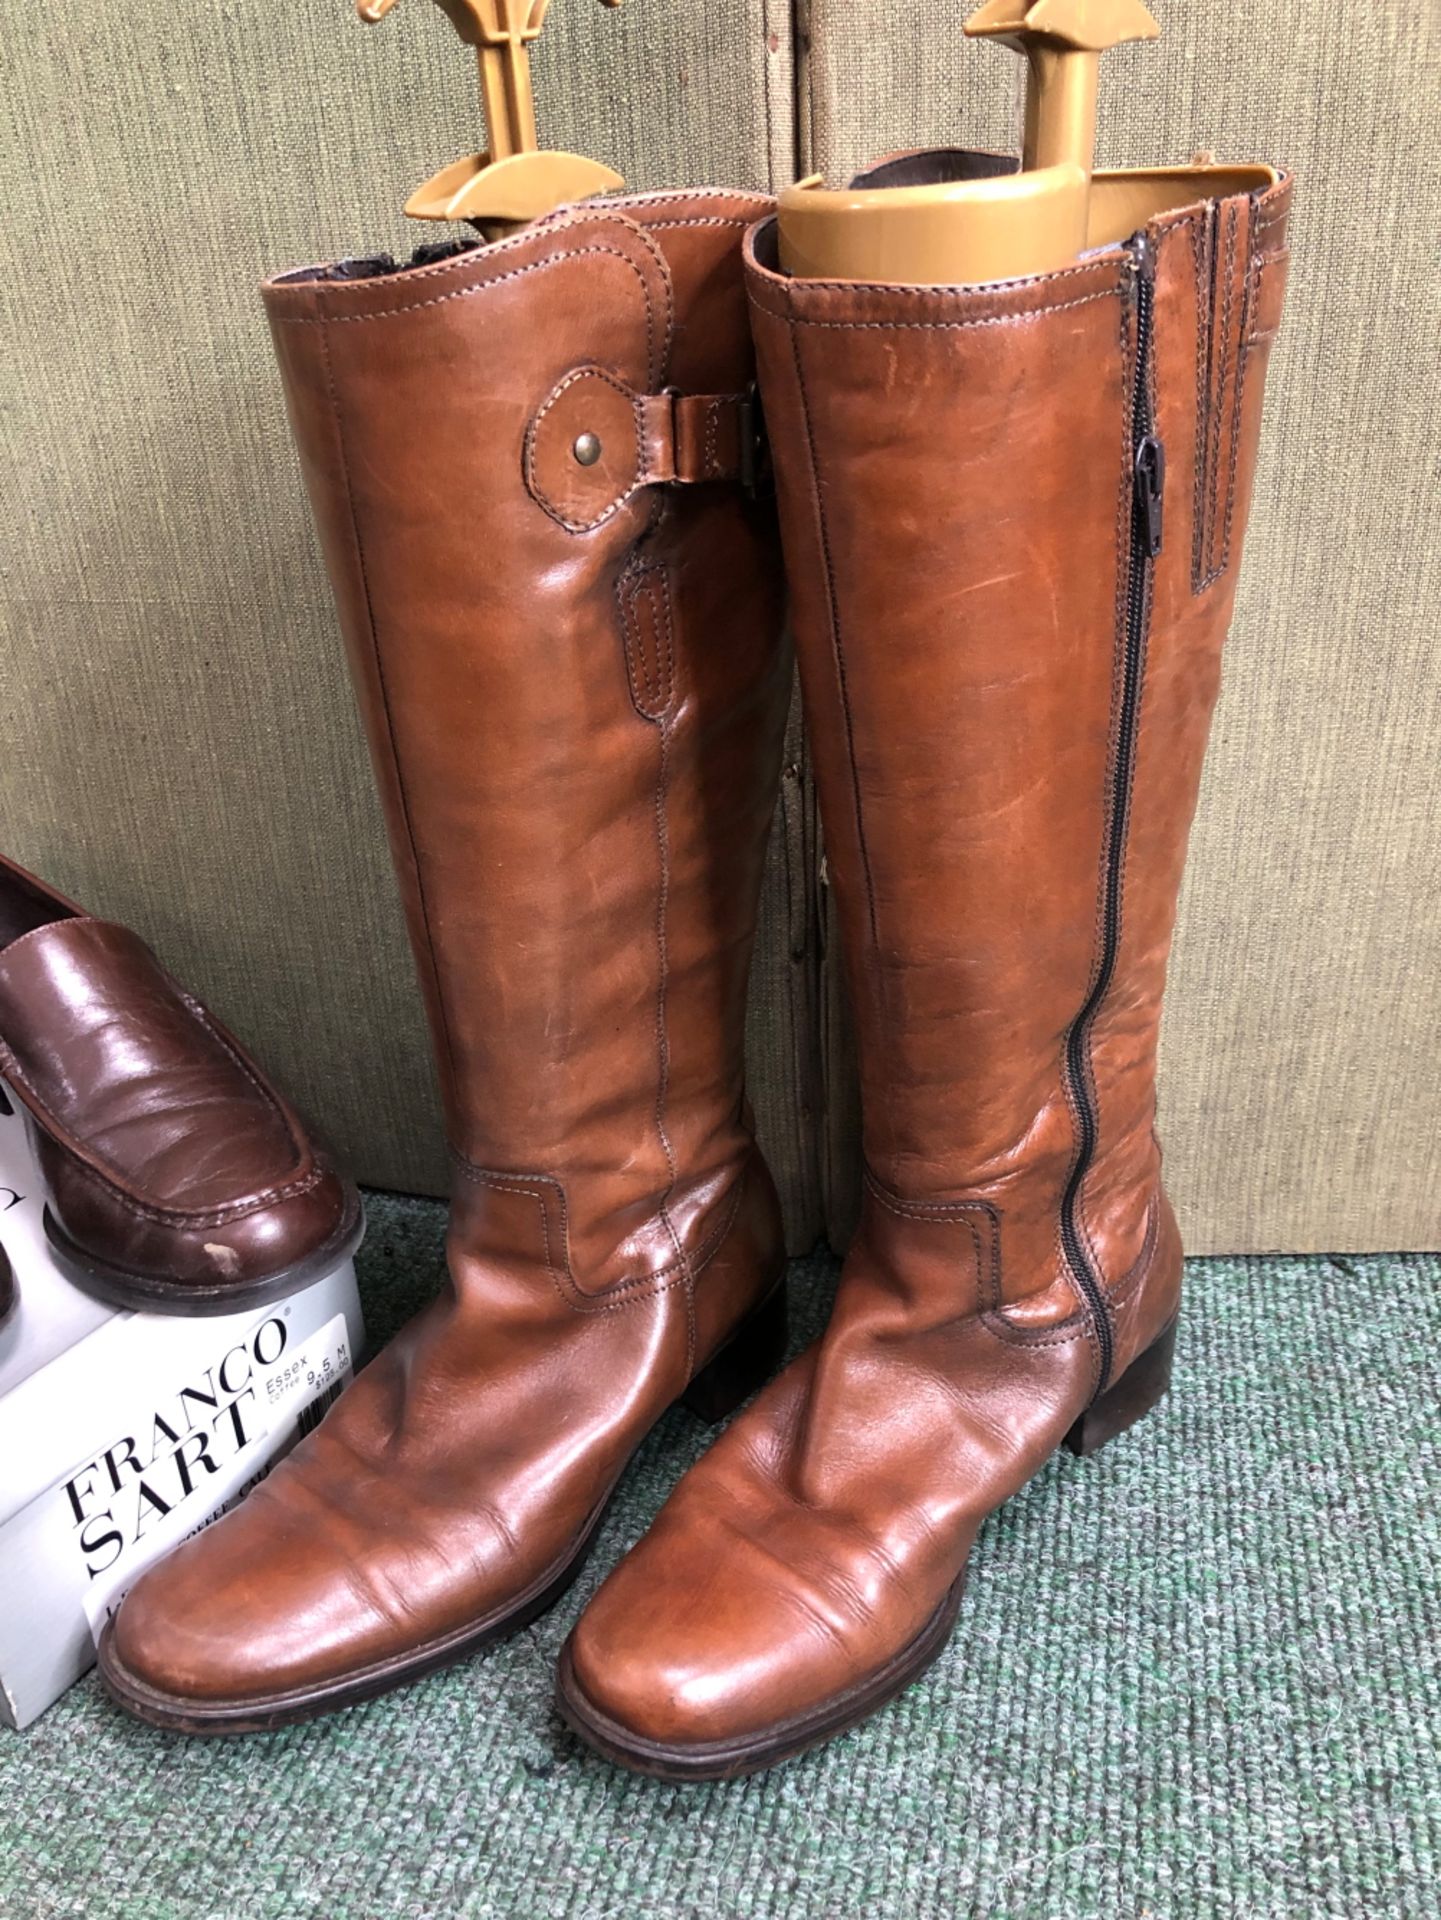 BOOTS. A LONG PAIR OF YOUR SIXTH SENSE BROWN BOOTS SIZE EUR 40, TOGETHER WITH A PAIR OF FRANCO SARTO - Image 2 of 7